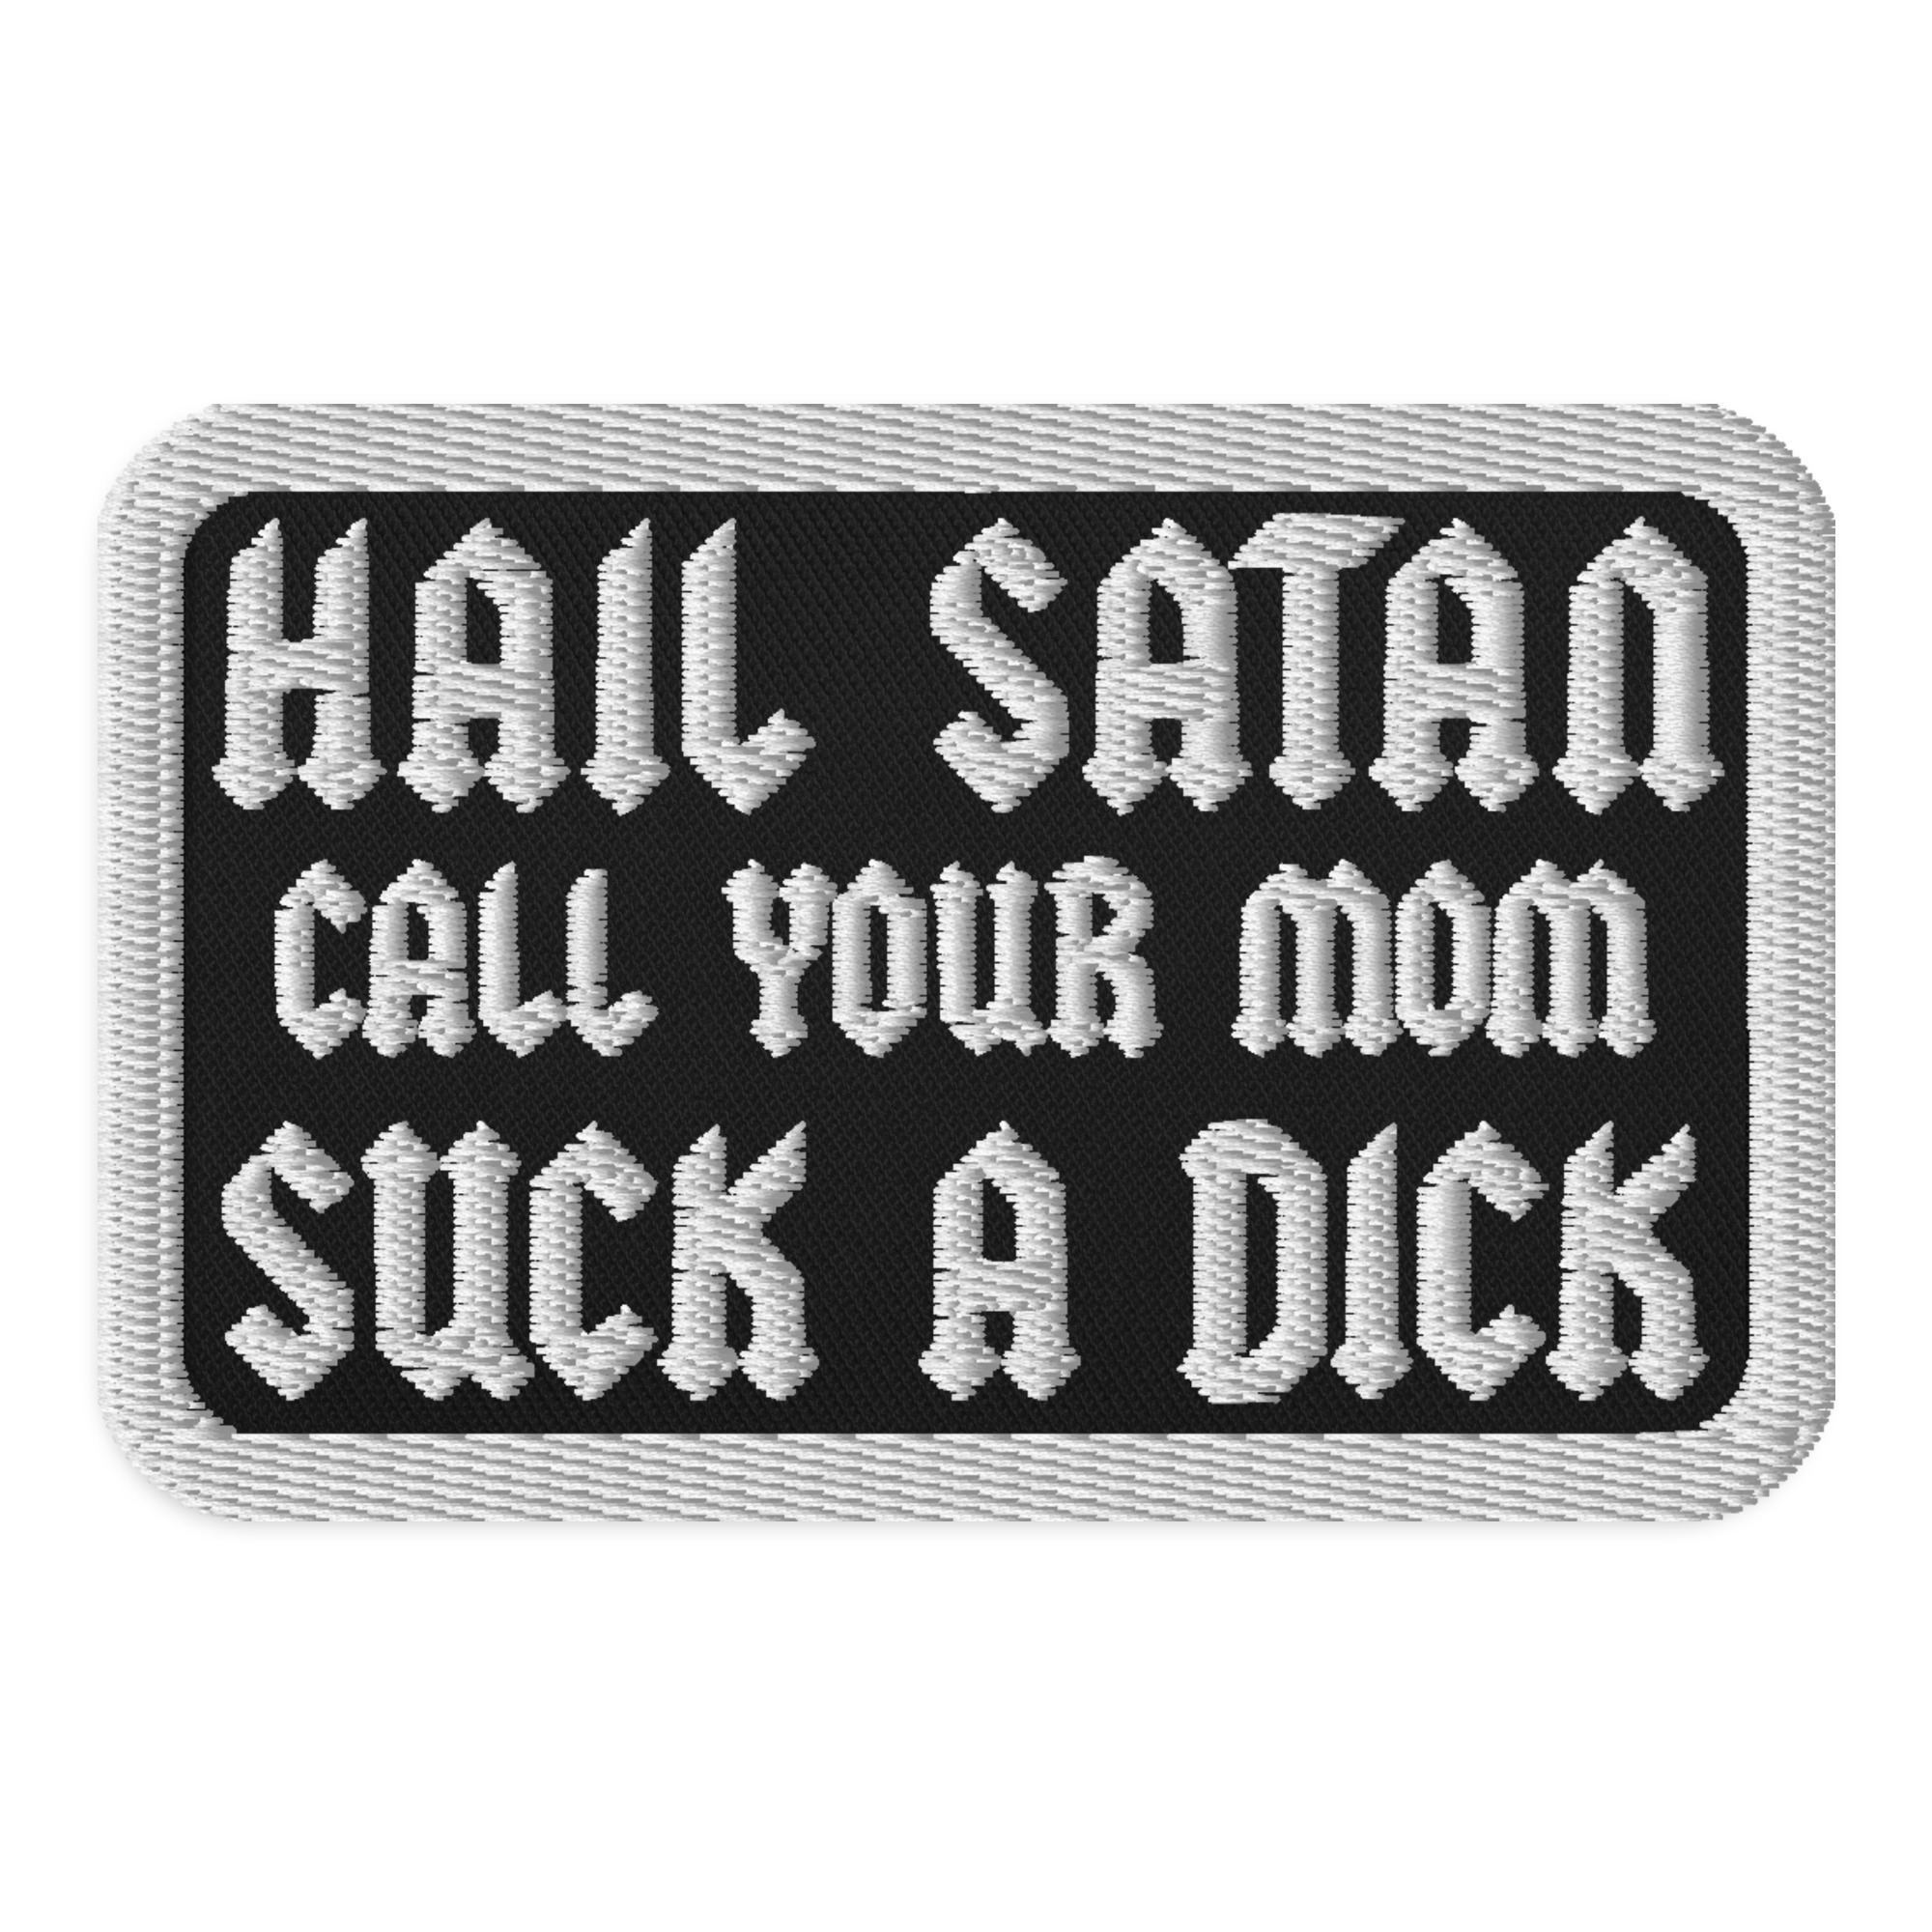 Featured image for “Hail Satan, Call your Mom - Embroidered patches”